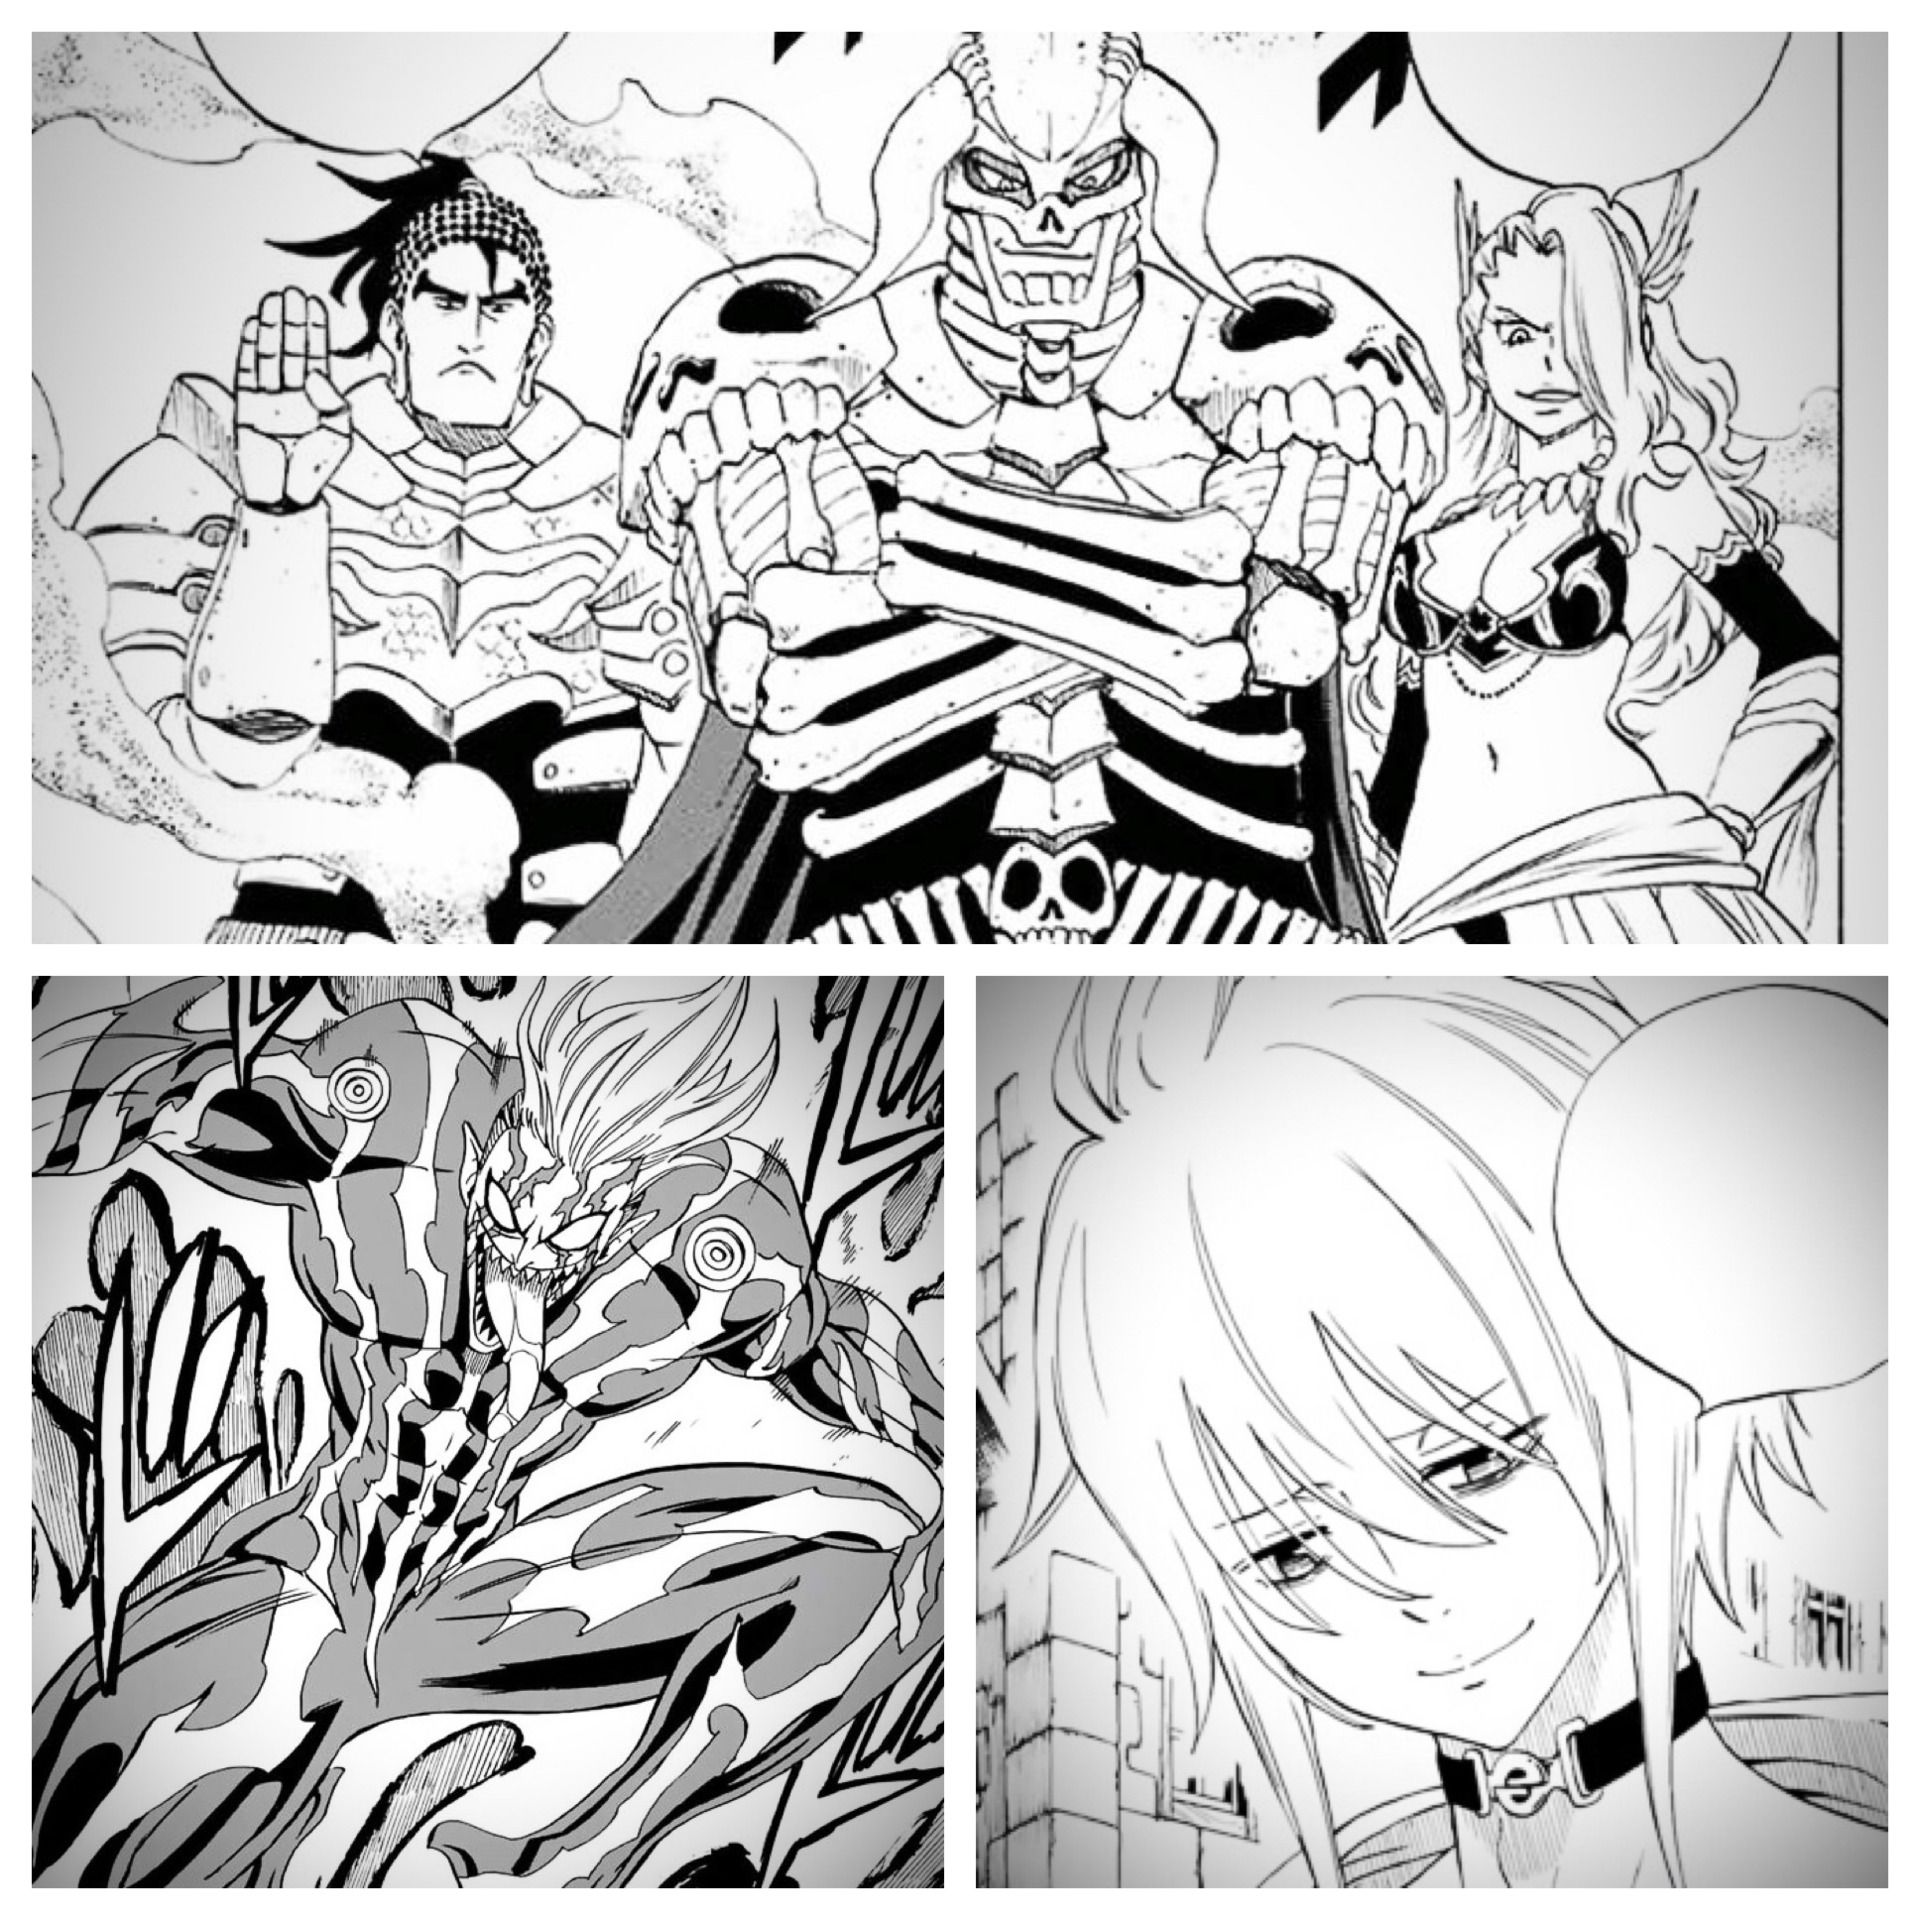 The Fifth Generation Dragon Slayers from Fairy Tail